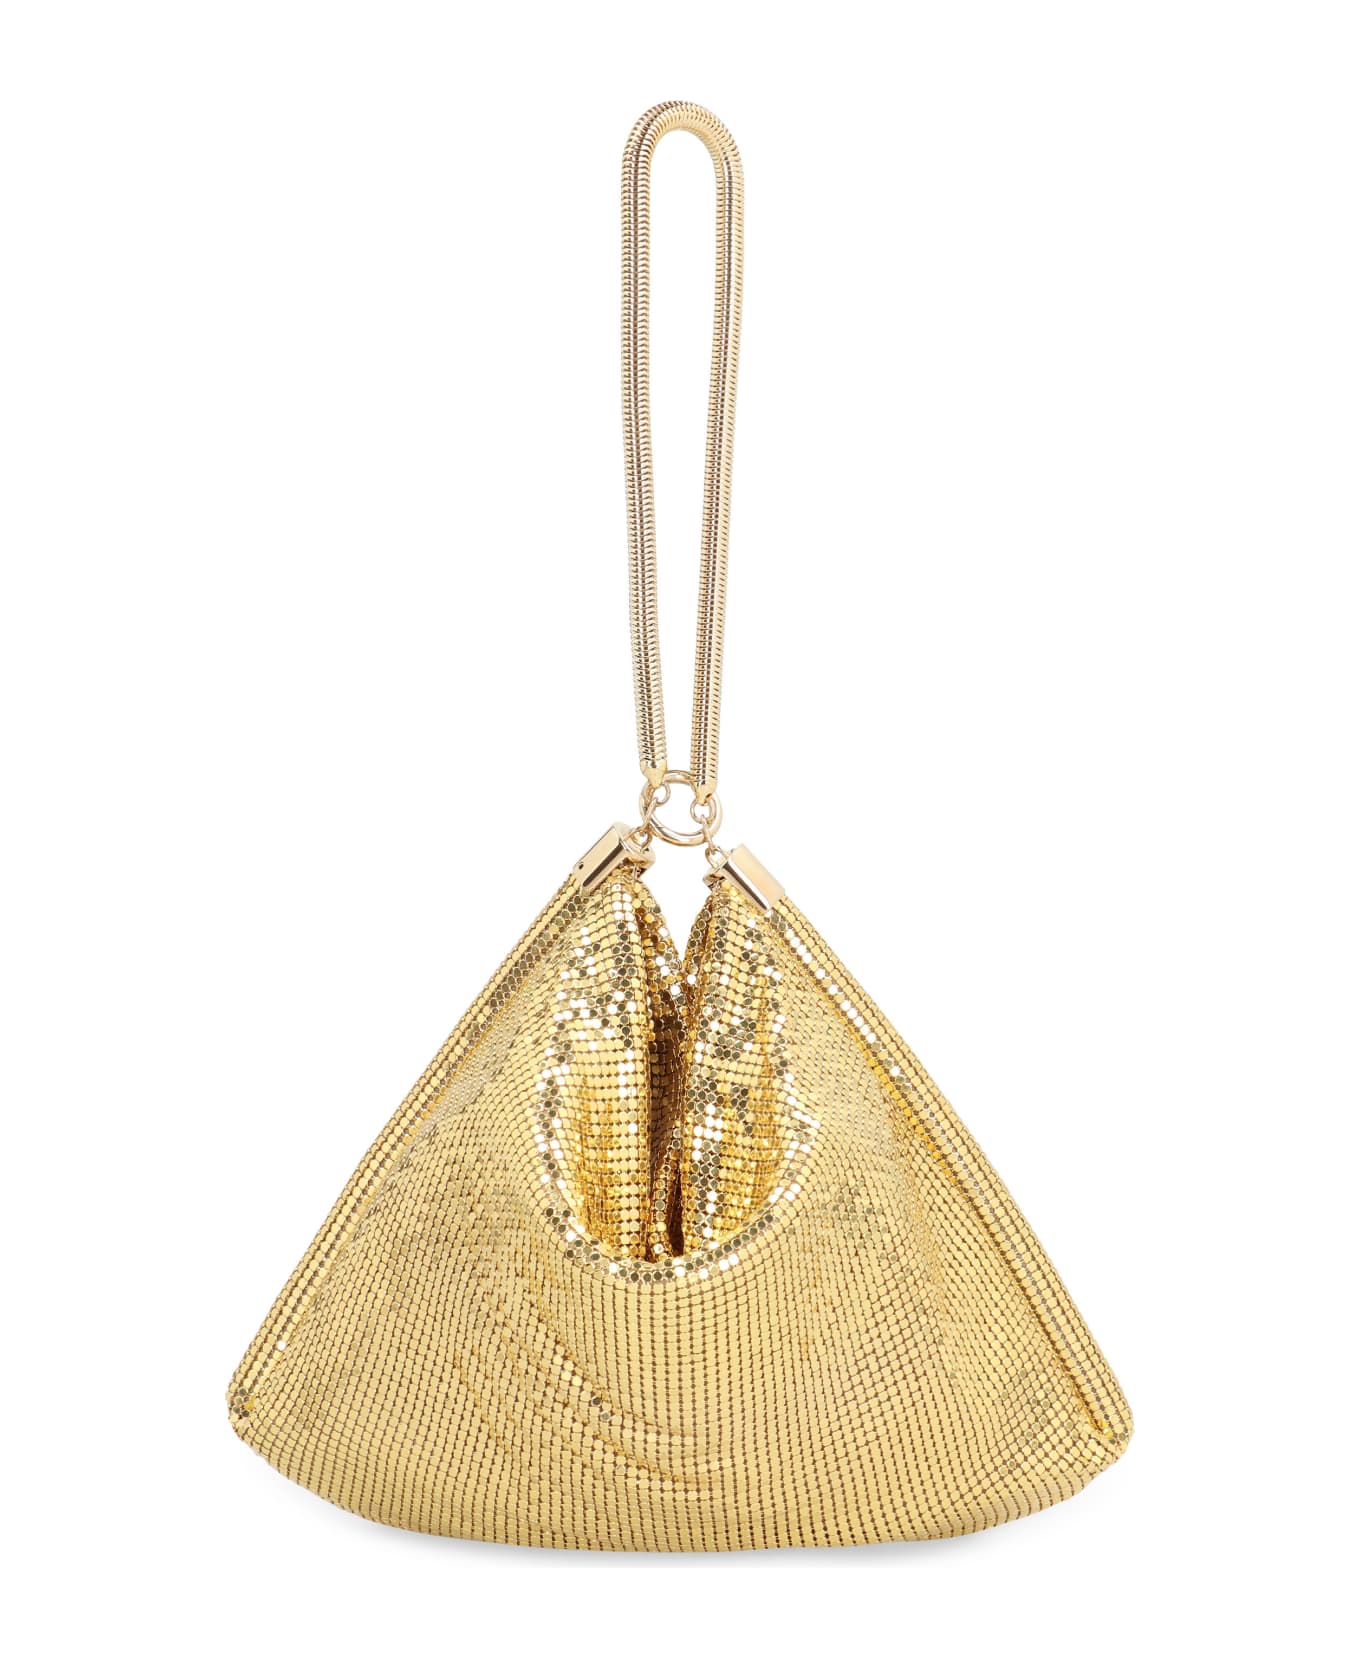 Paco Rabanne Chainmail Pocket Bag - gold